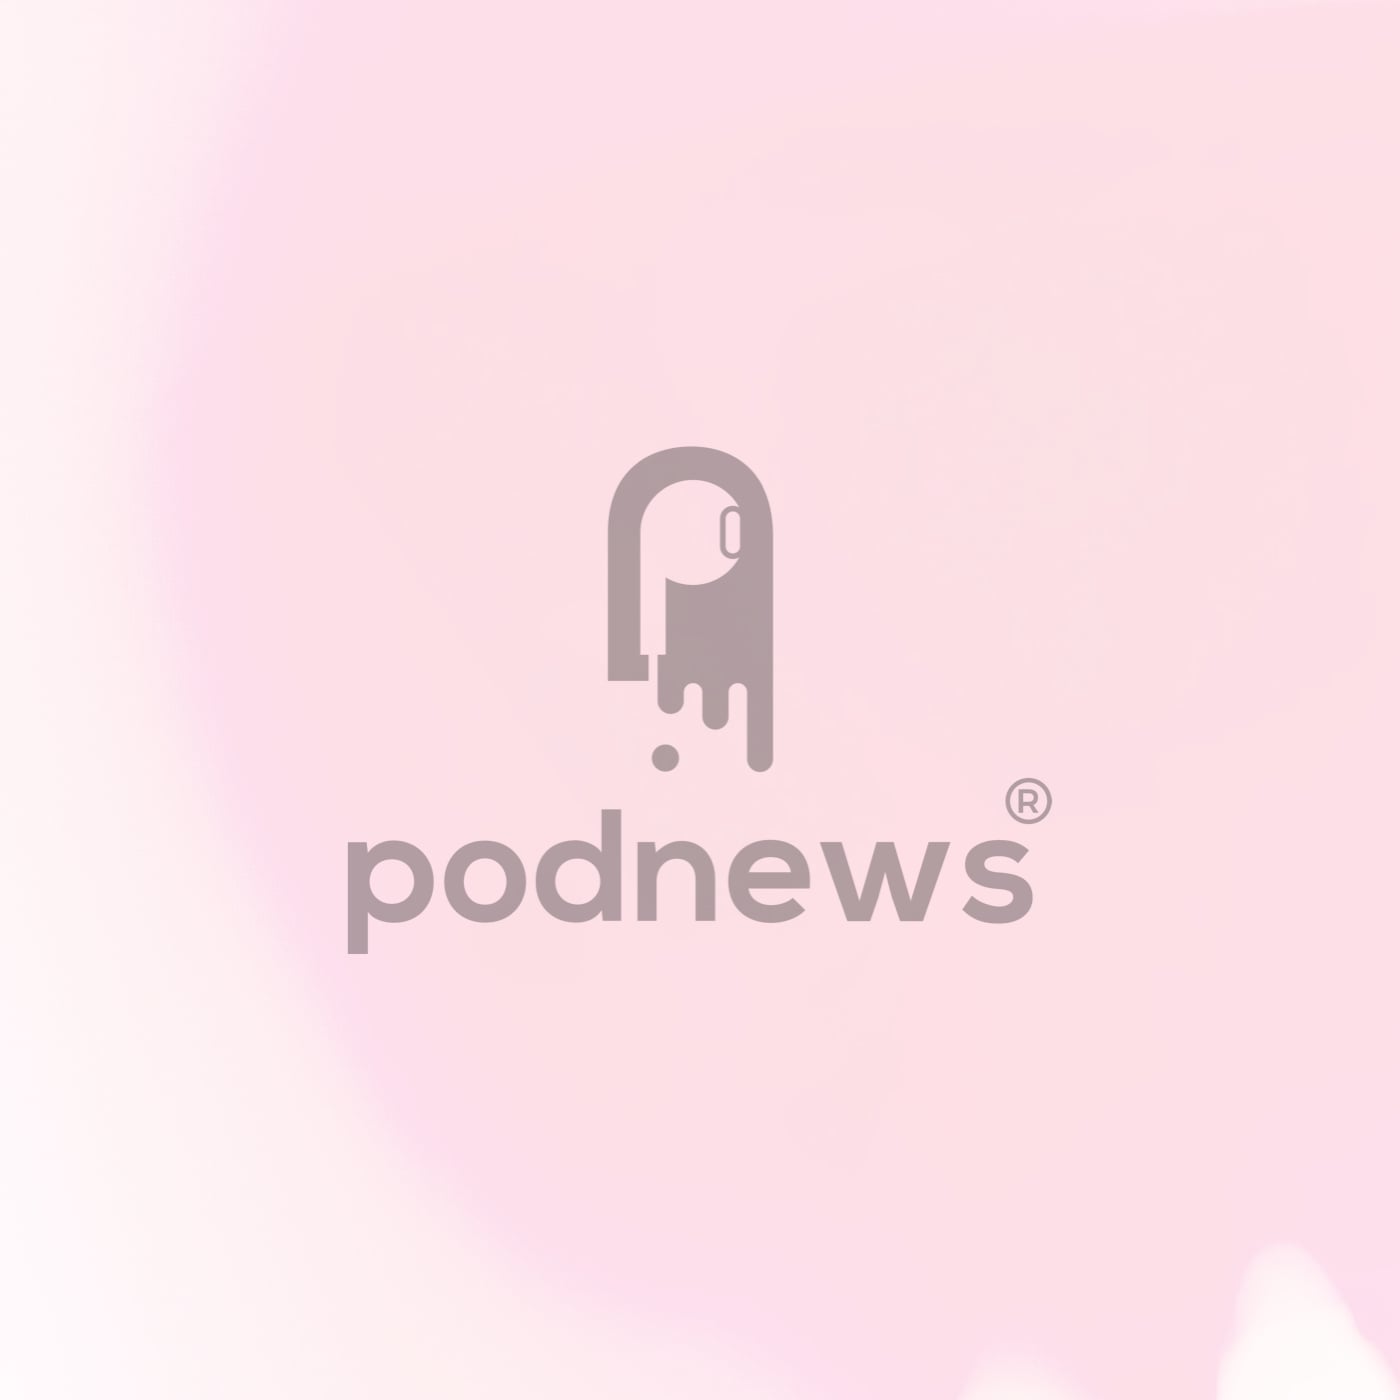 Want to use our stuff? Really simple syndication of Podnews